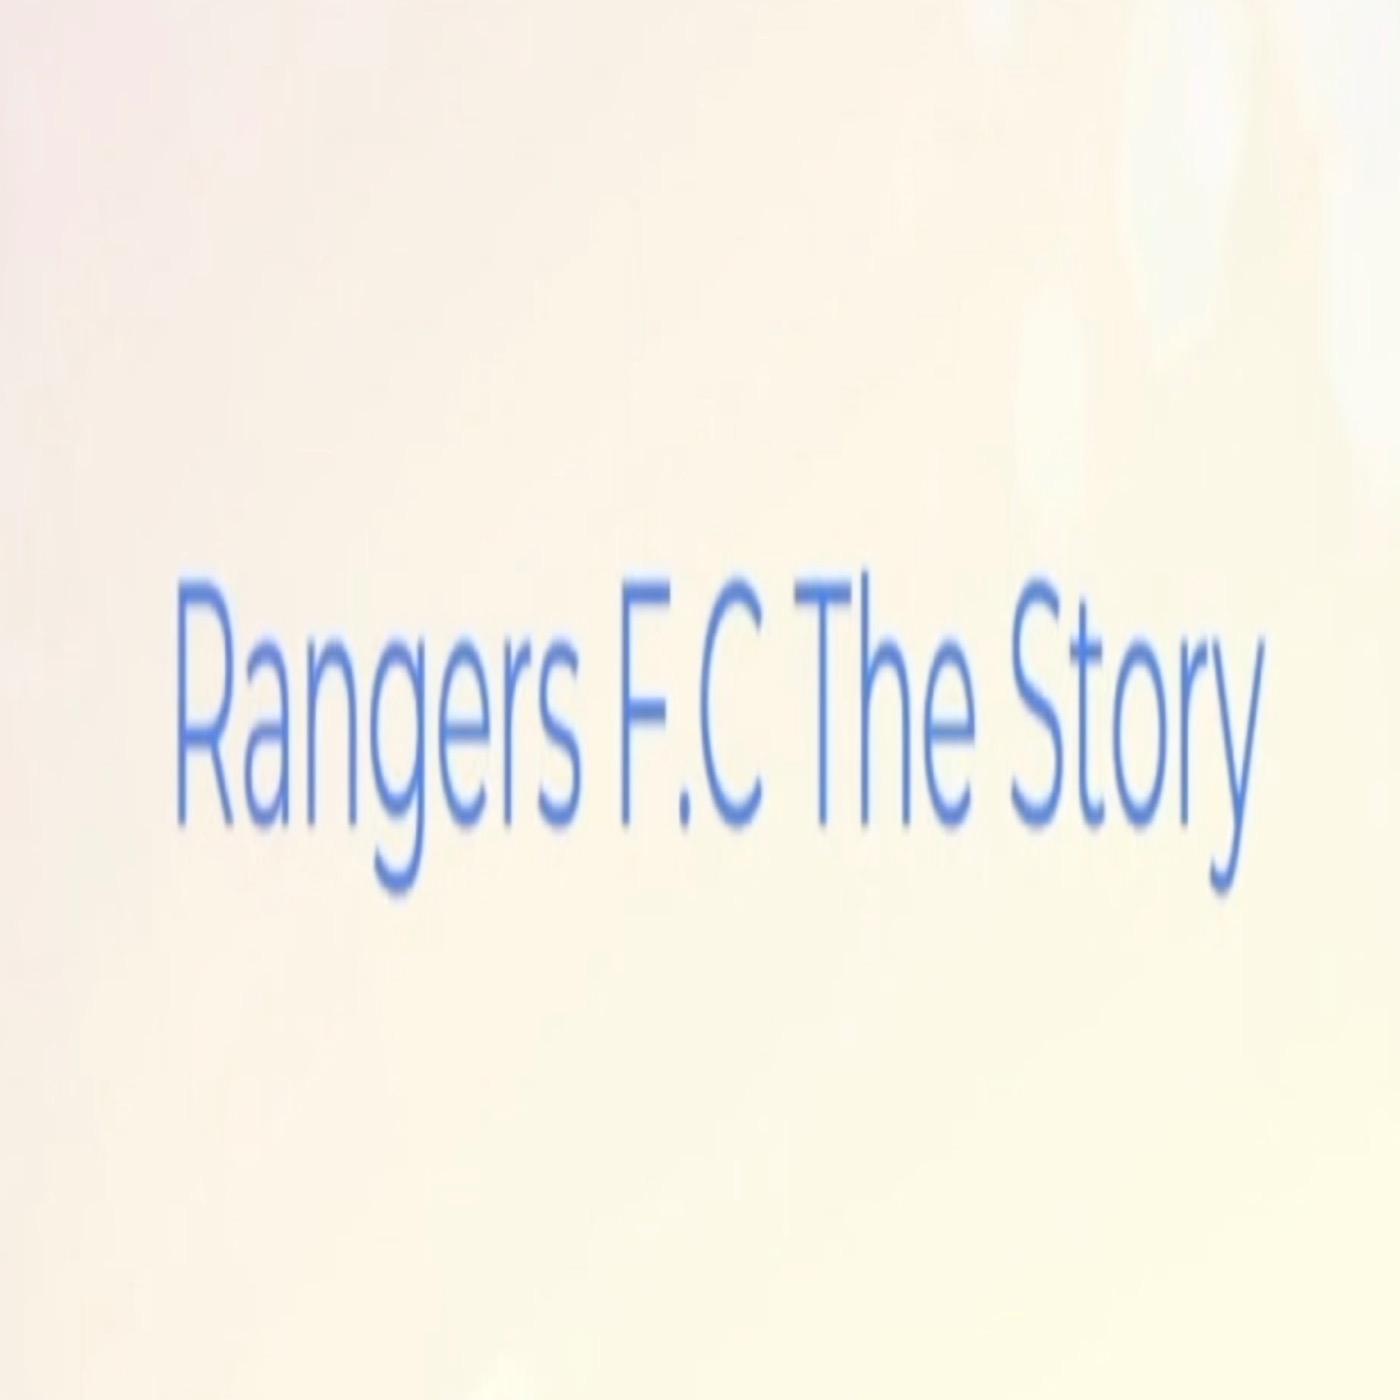 Rangers FC The Story: The Podcast